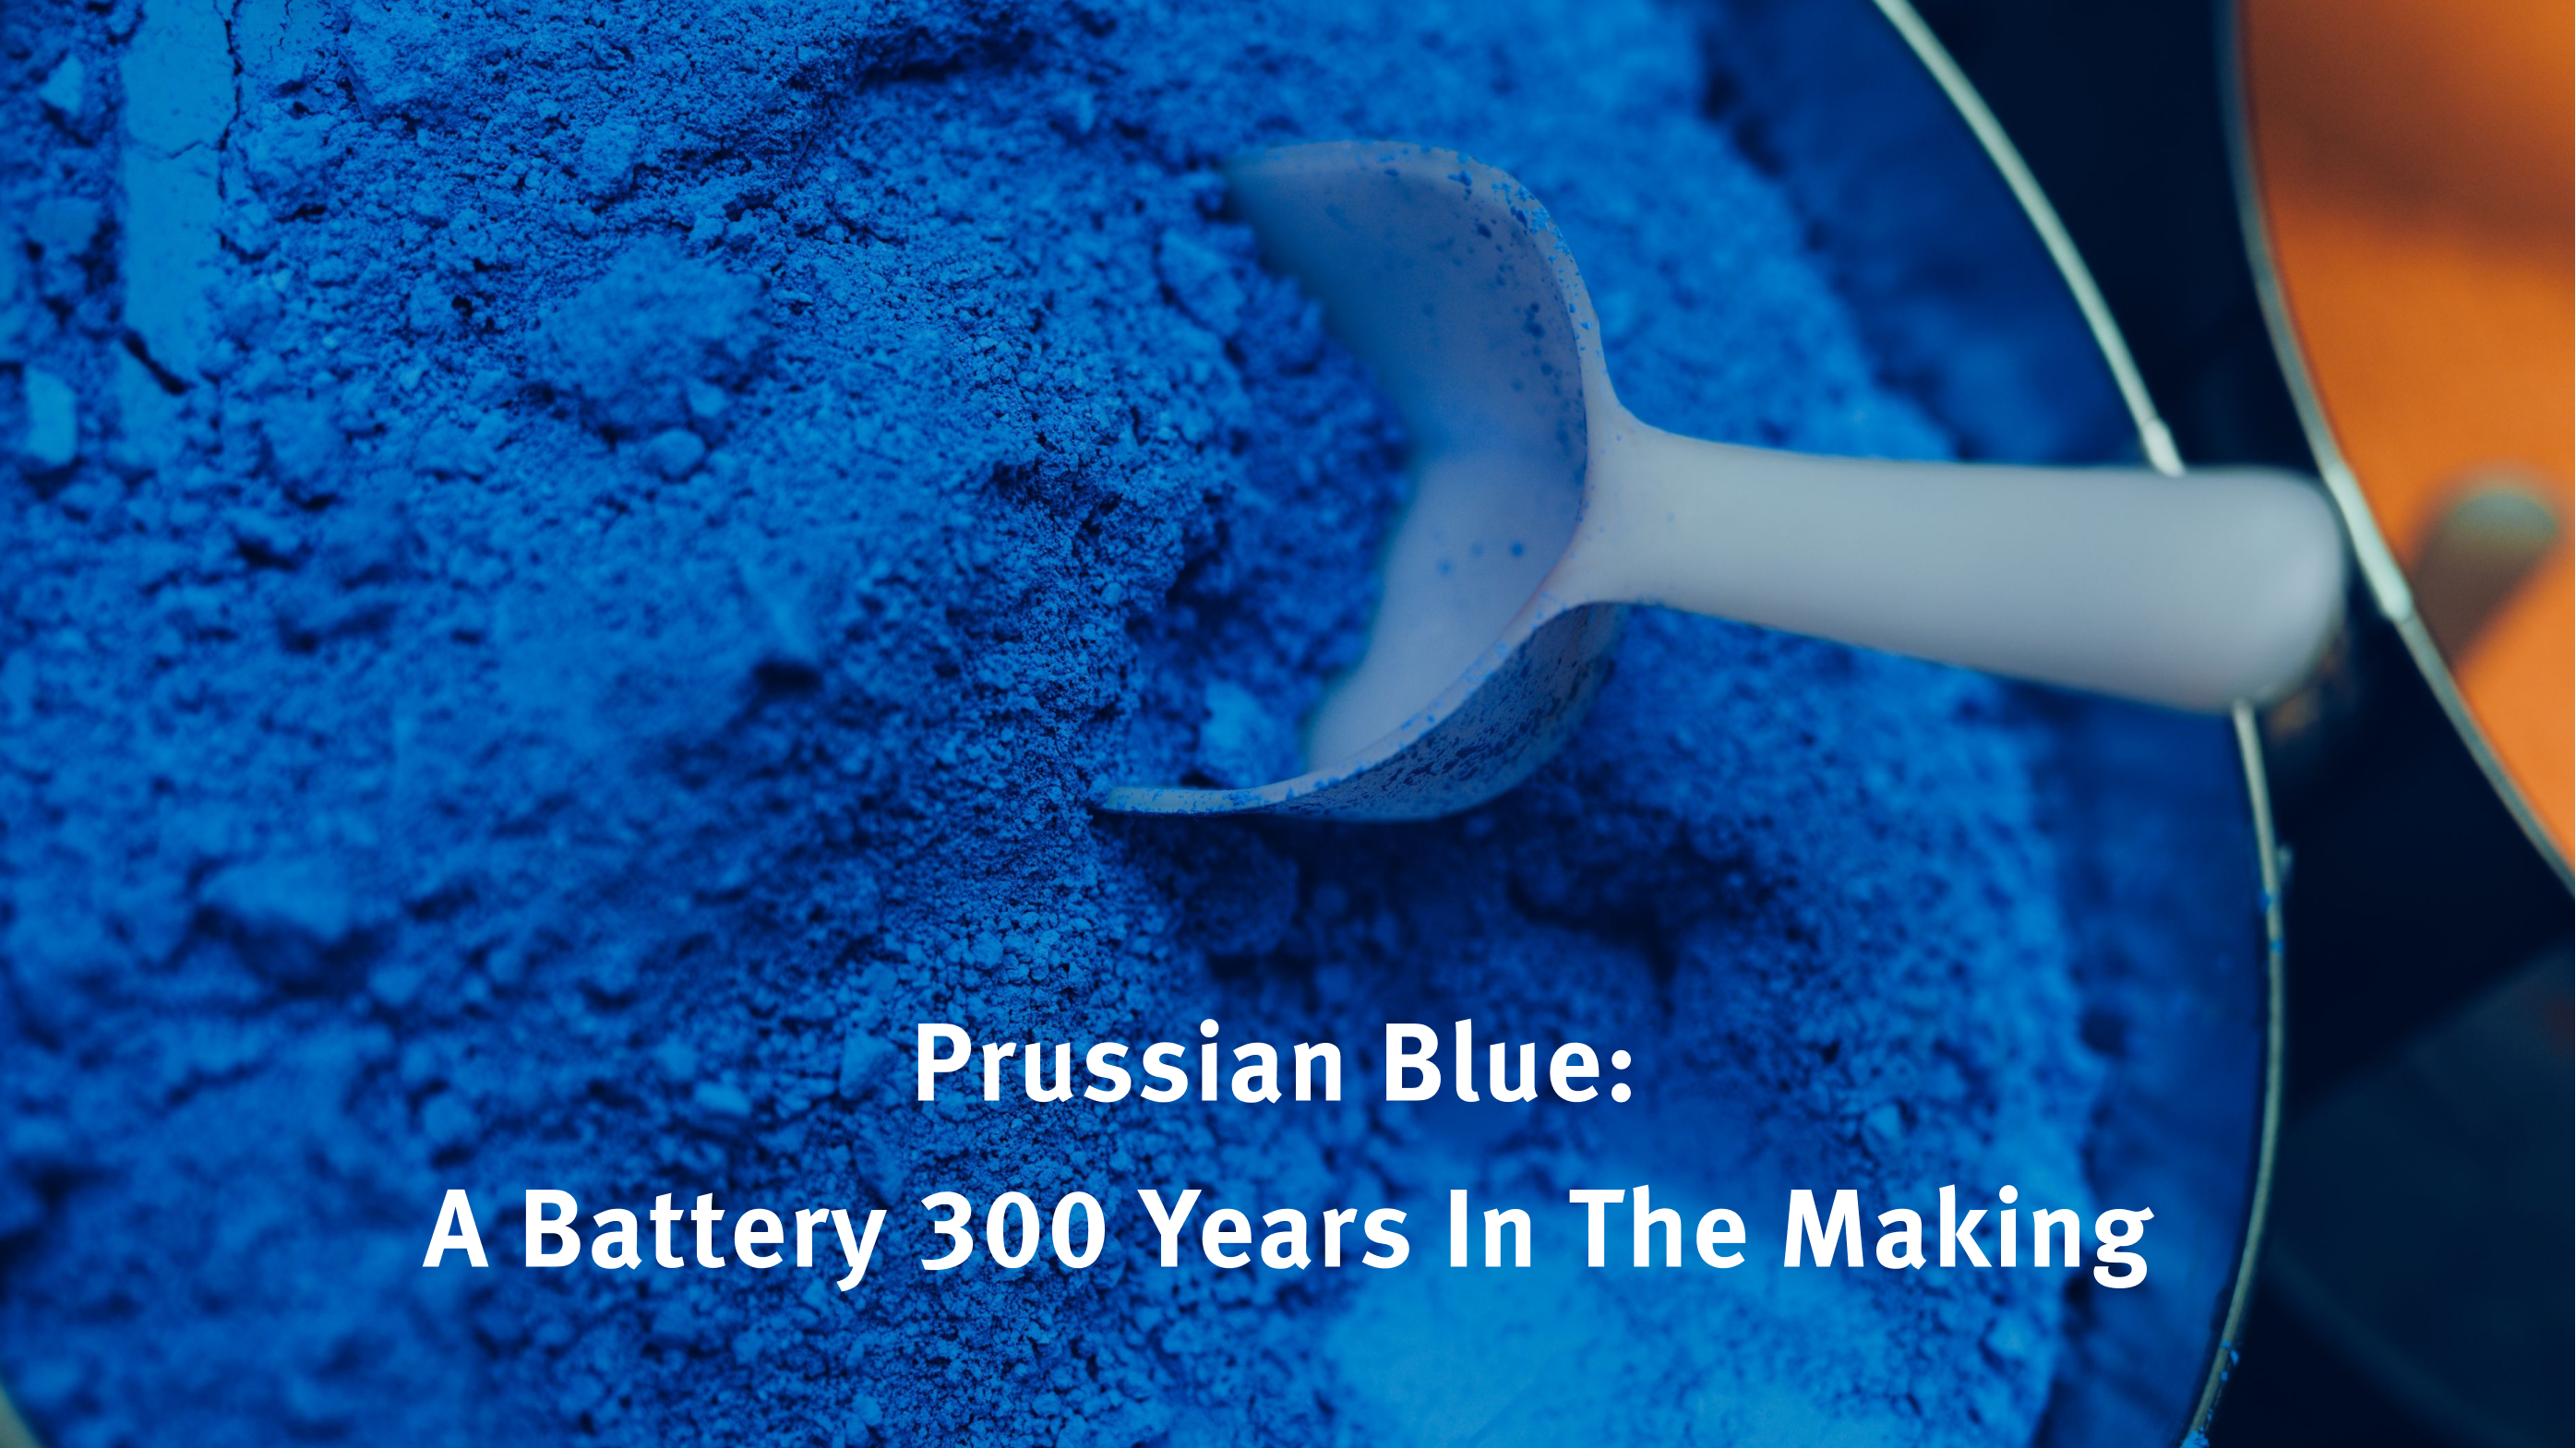 Prussian Blue: A Battery 300 Years In The Making